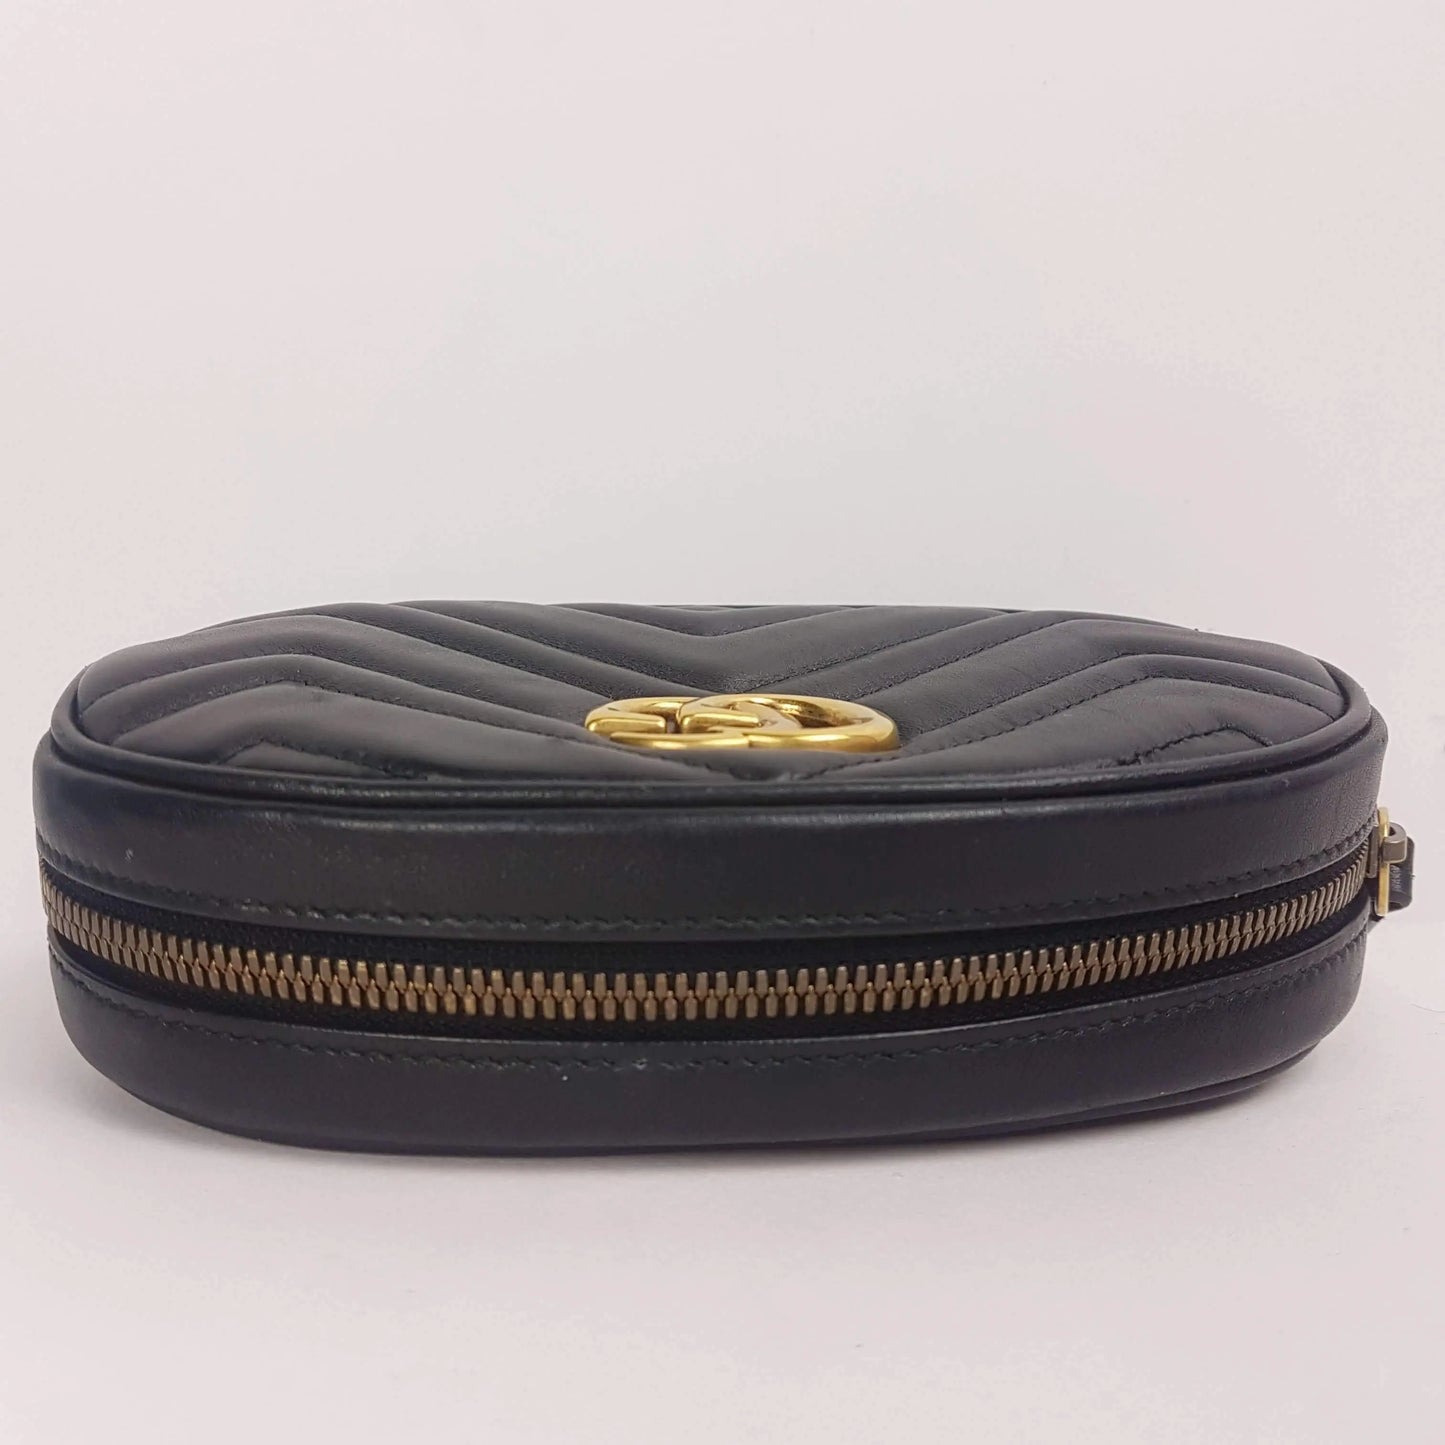 Load image into Gallery viewer, Gucci Gucci Black Quilted Leather GG Marmont Waist Belt Bag LVBagaholic
